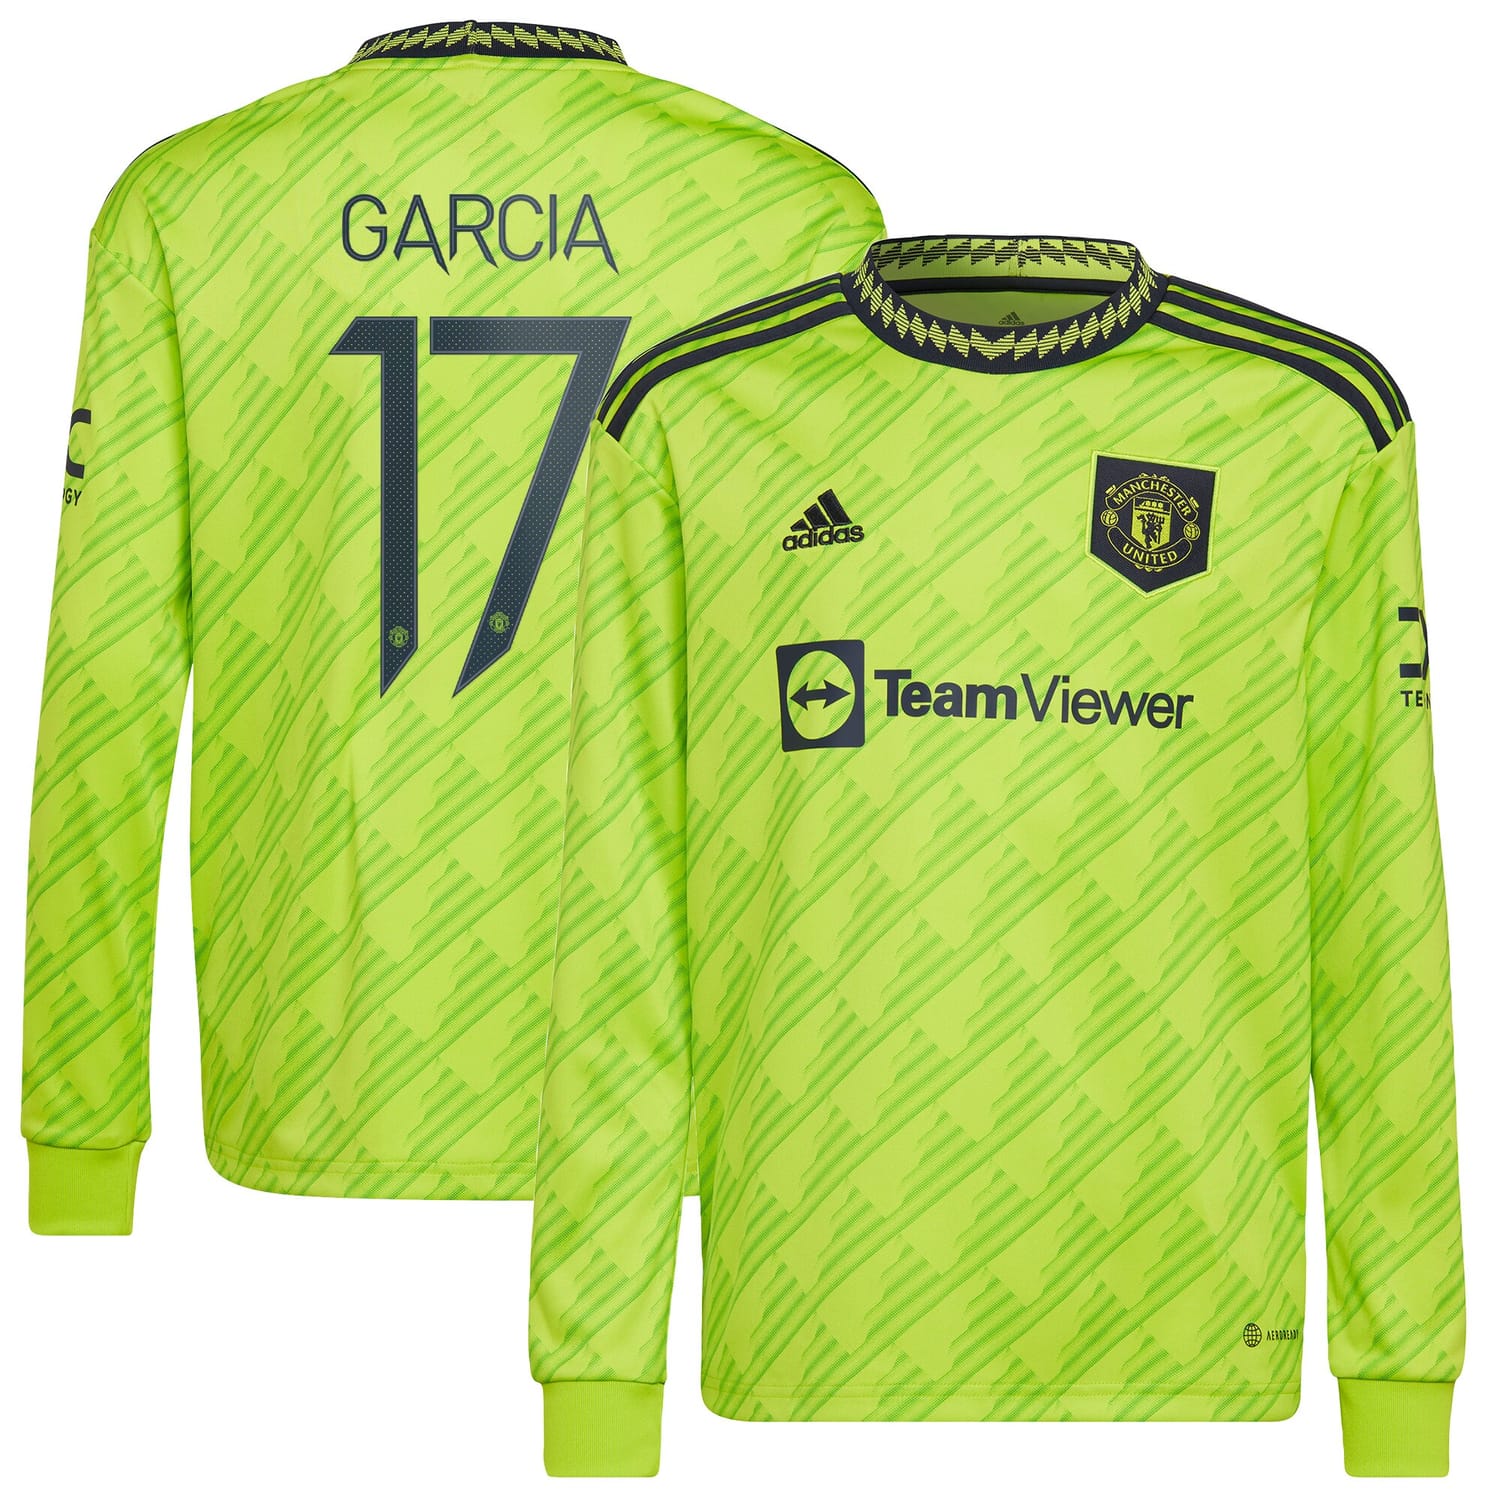 Premier League Manchester United Third Cup Jersey Shirt Long Sleeve 2022-23 player Lucia Garcia 17 printing for Men